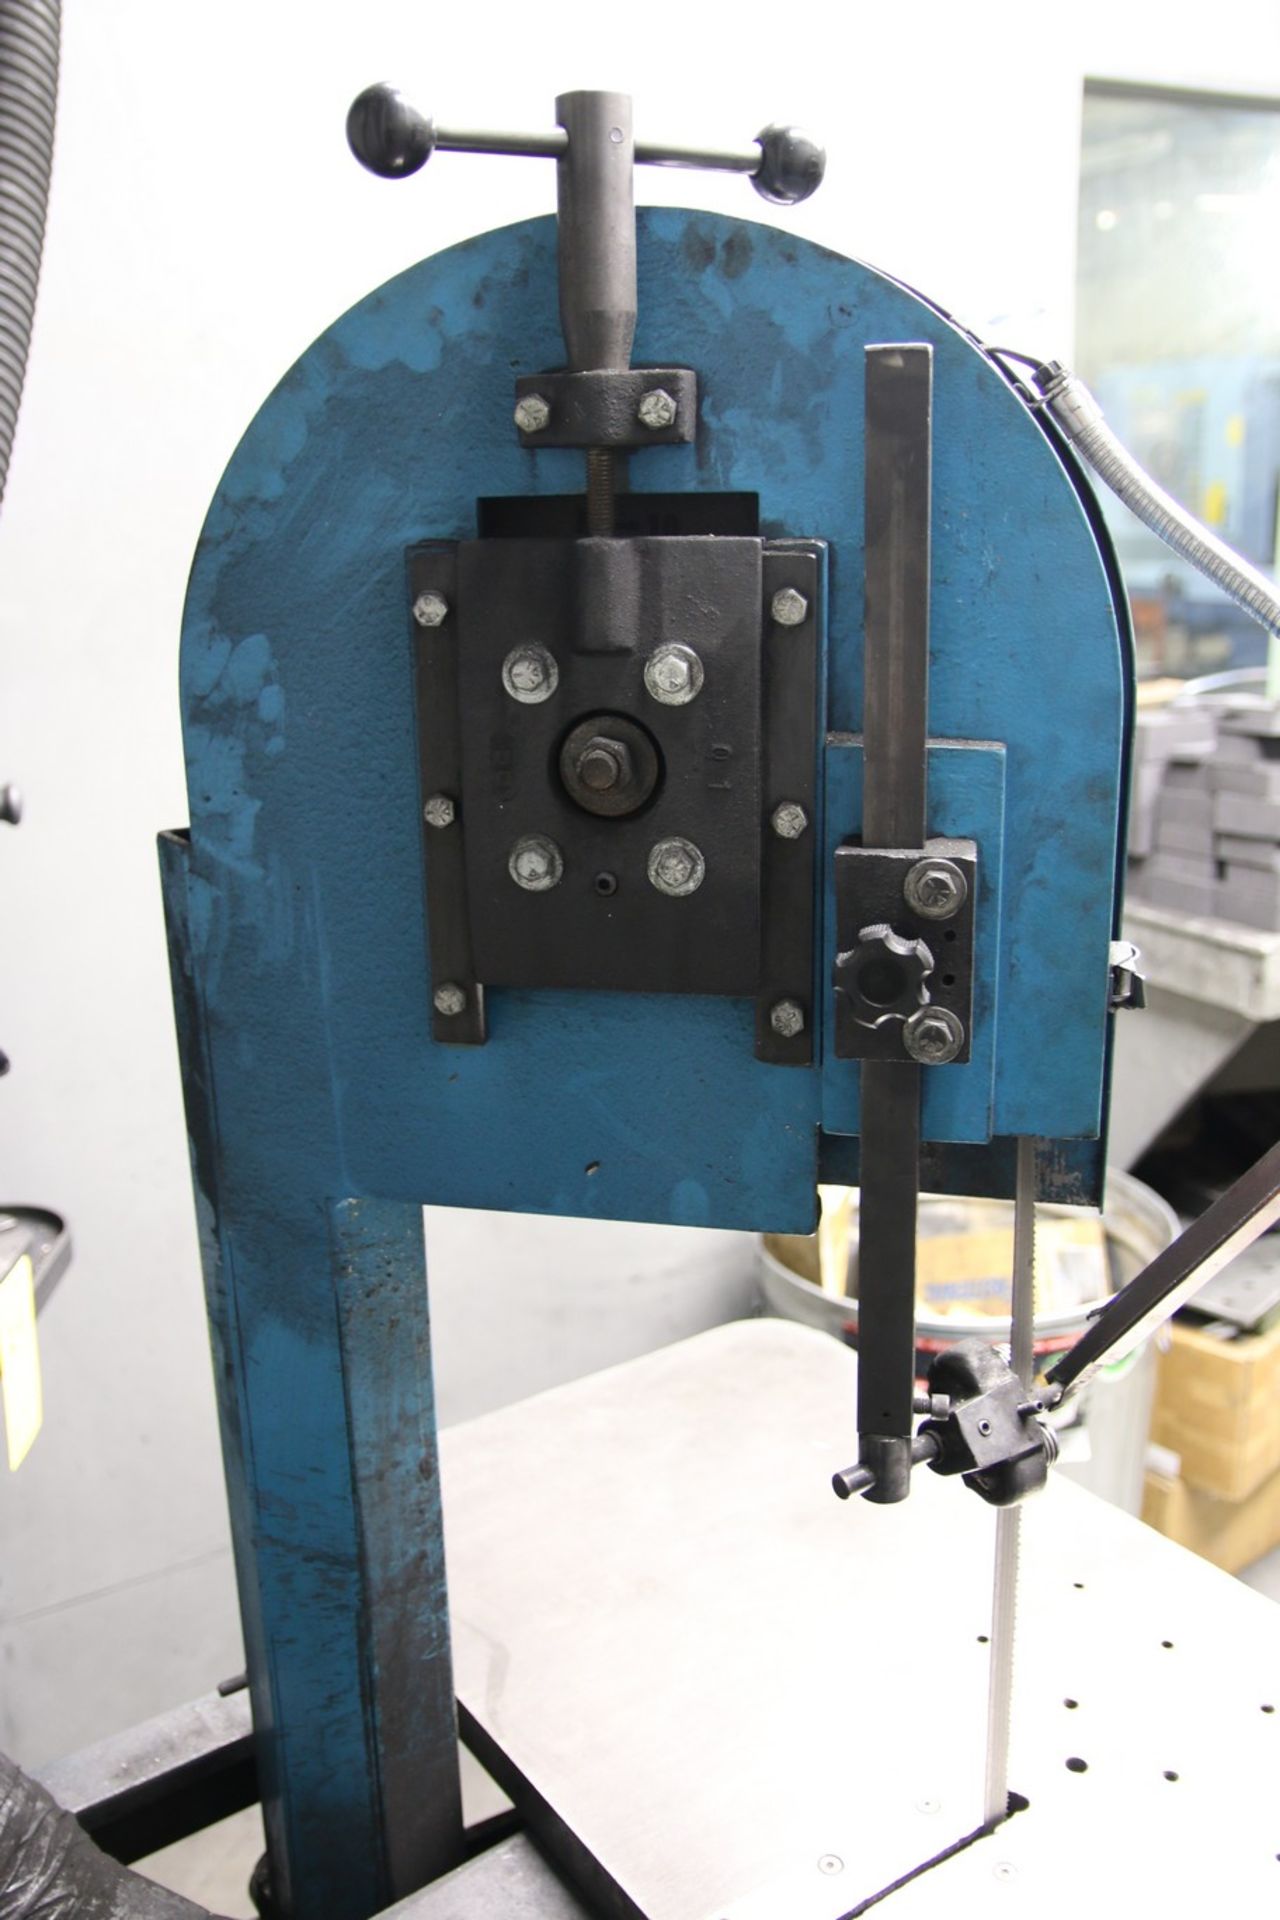 Roll-In Roll-In Gravity Feed Vertical Band Saw 1 HP, 45 Degree Vise Miter at Maximum - Image 4 of 5